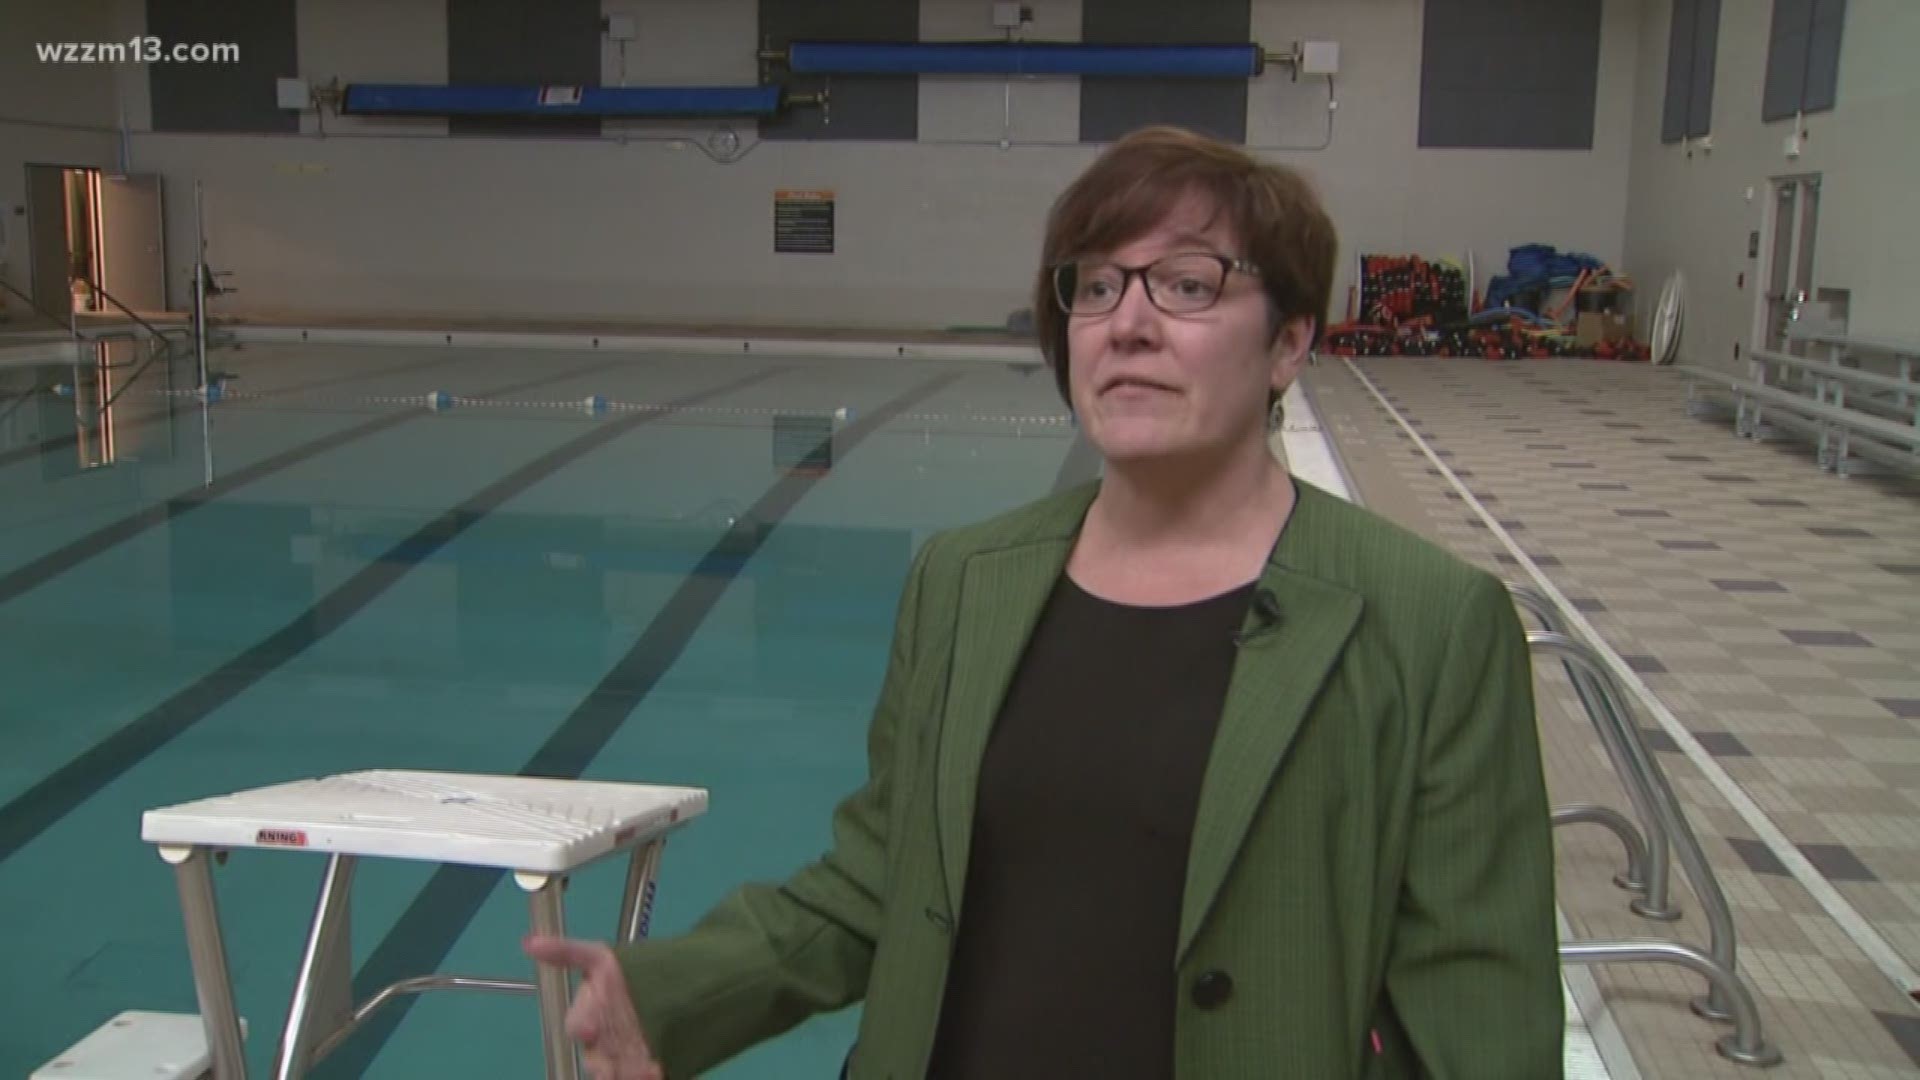 Muskegon Hts. looks to reopen city pool